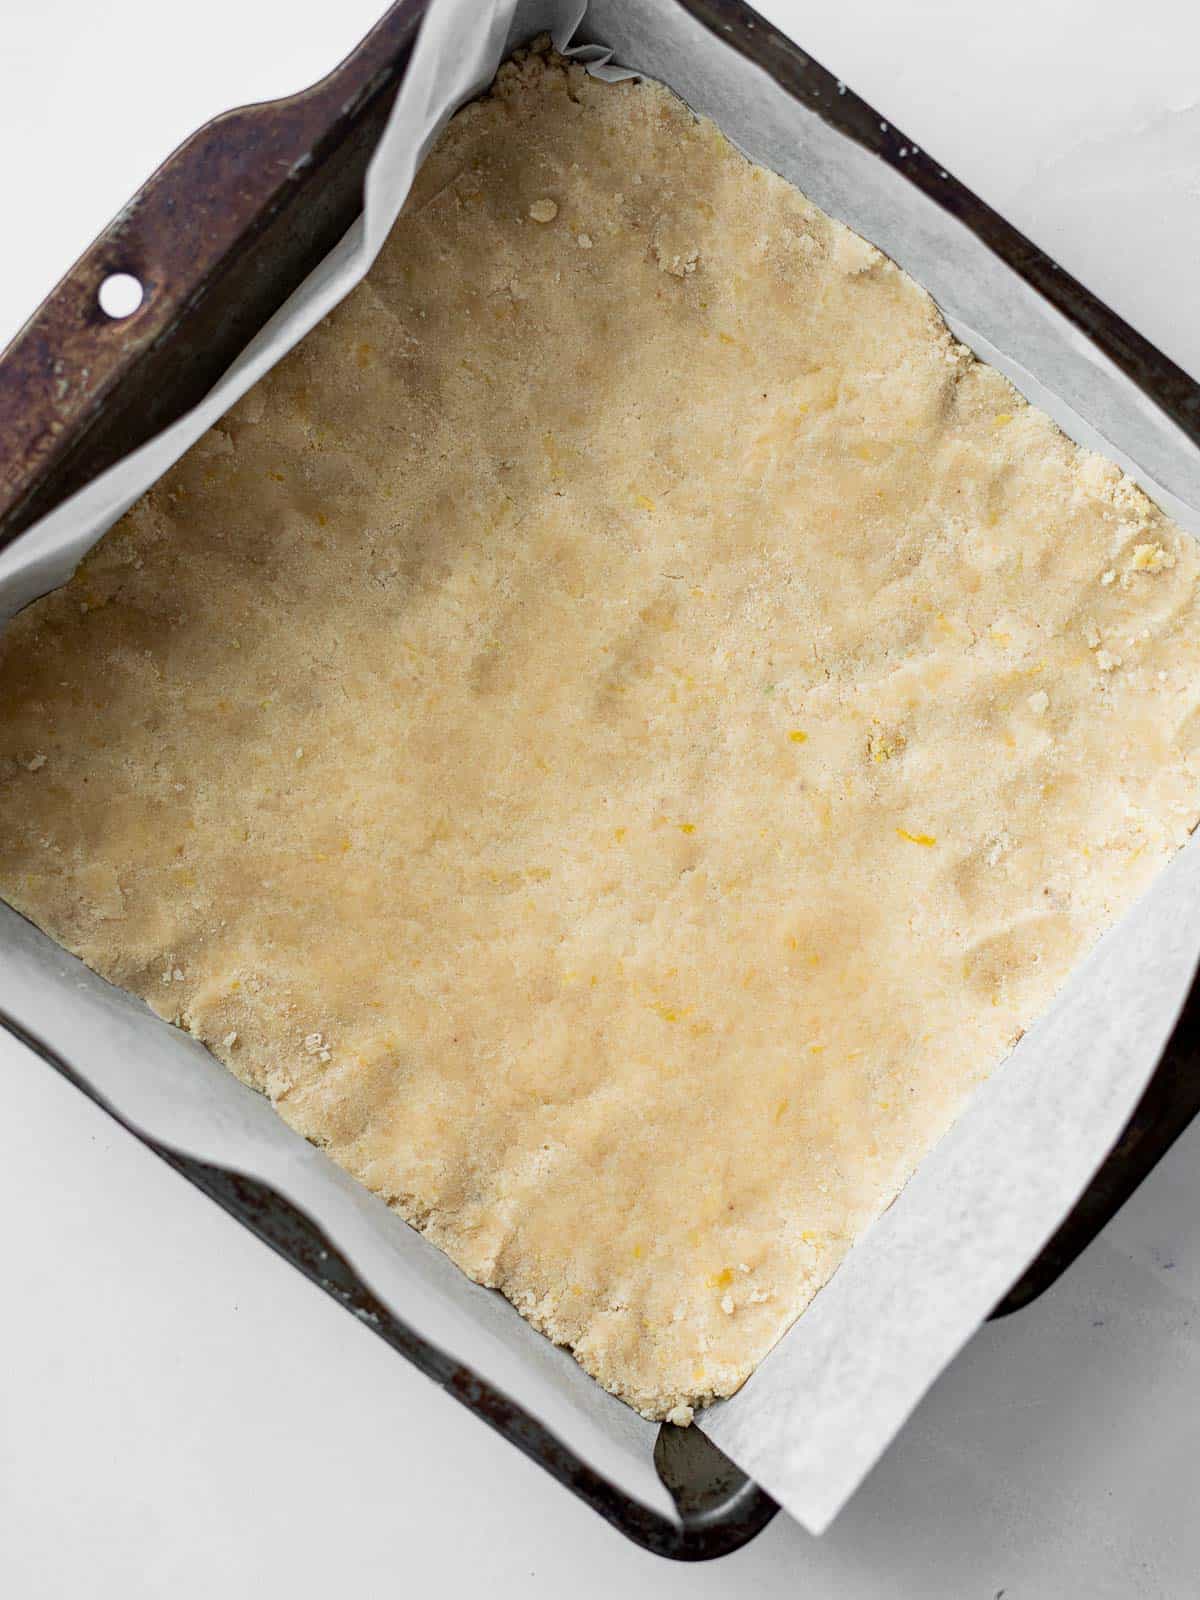 lemon shortbread dough pressed into a crust in a parchment lined baking pan.